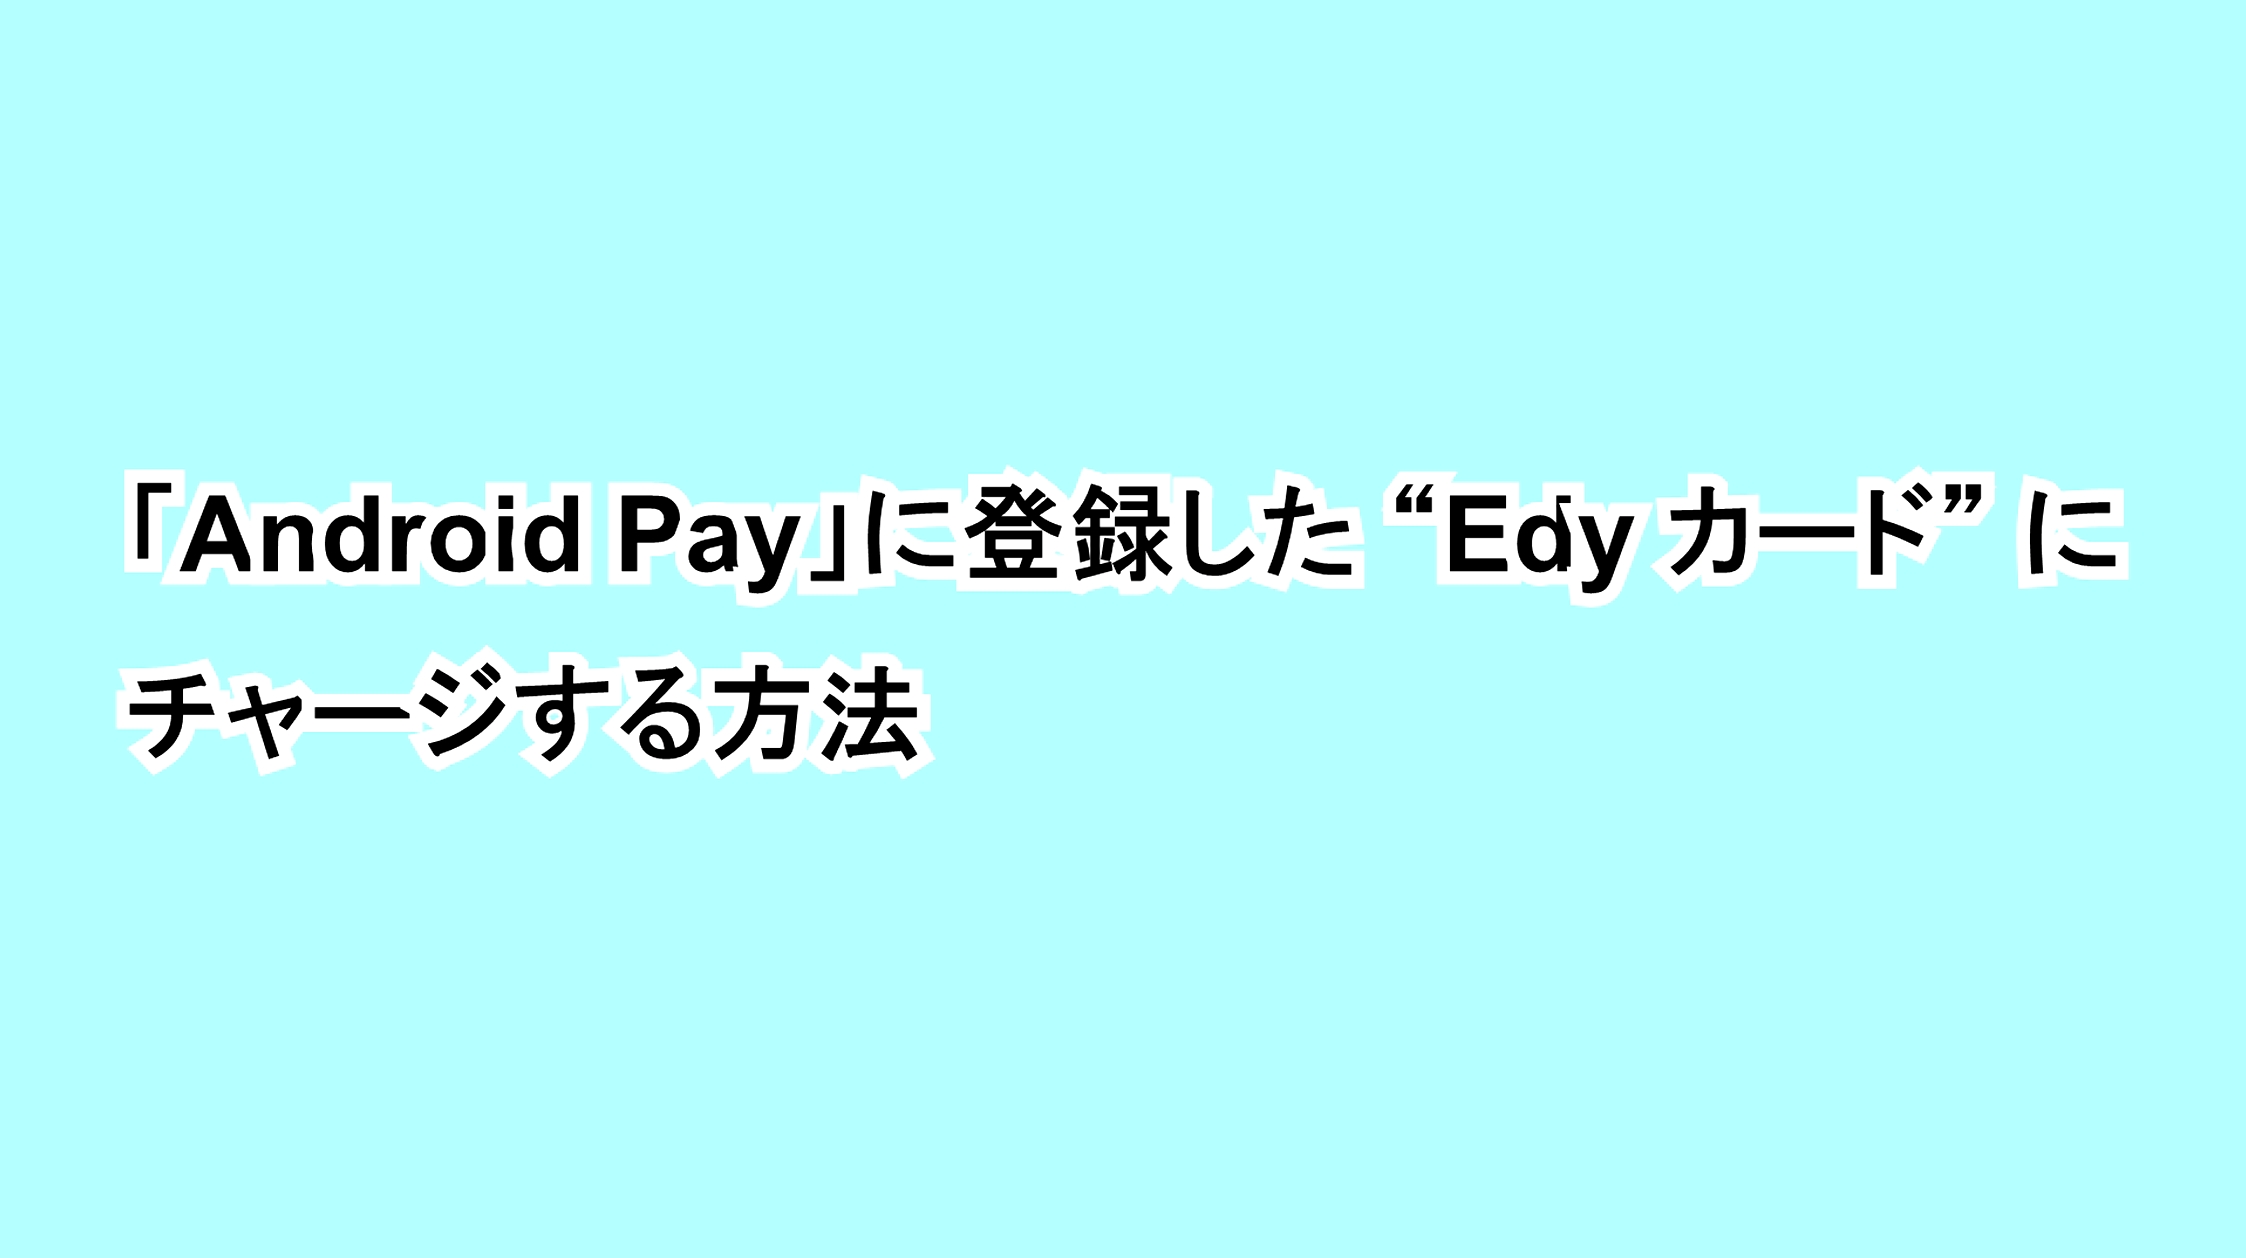 「Android Pay」に登録した“Edy カード”にチャージする方法